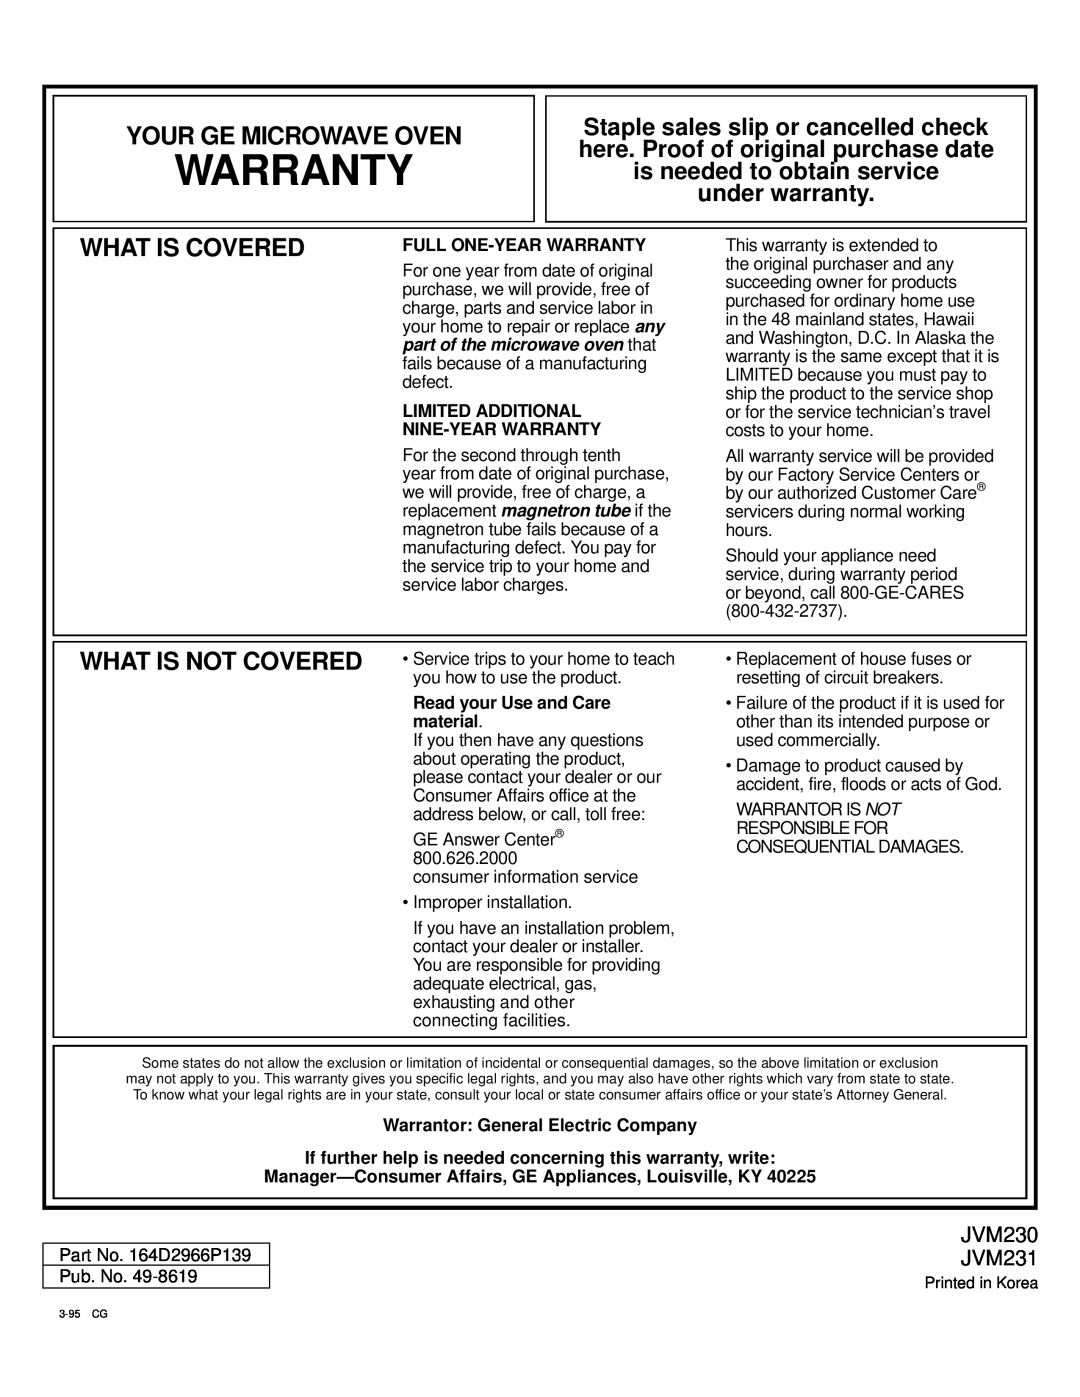 GE Warranty, Your Ge Microwave Oven, What Is Covered, What Is Not Covered, under warranty, JVM230 JVM231, material 